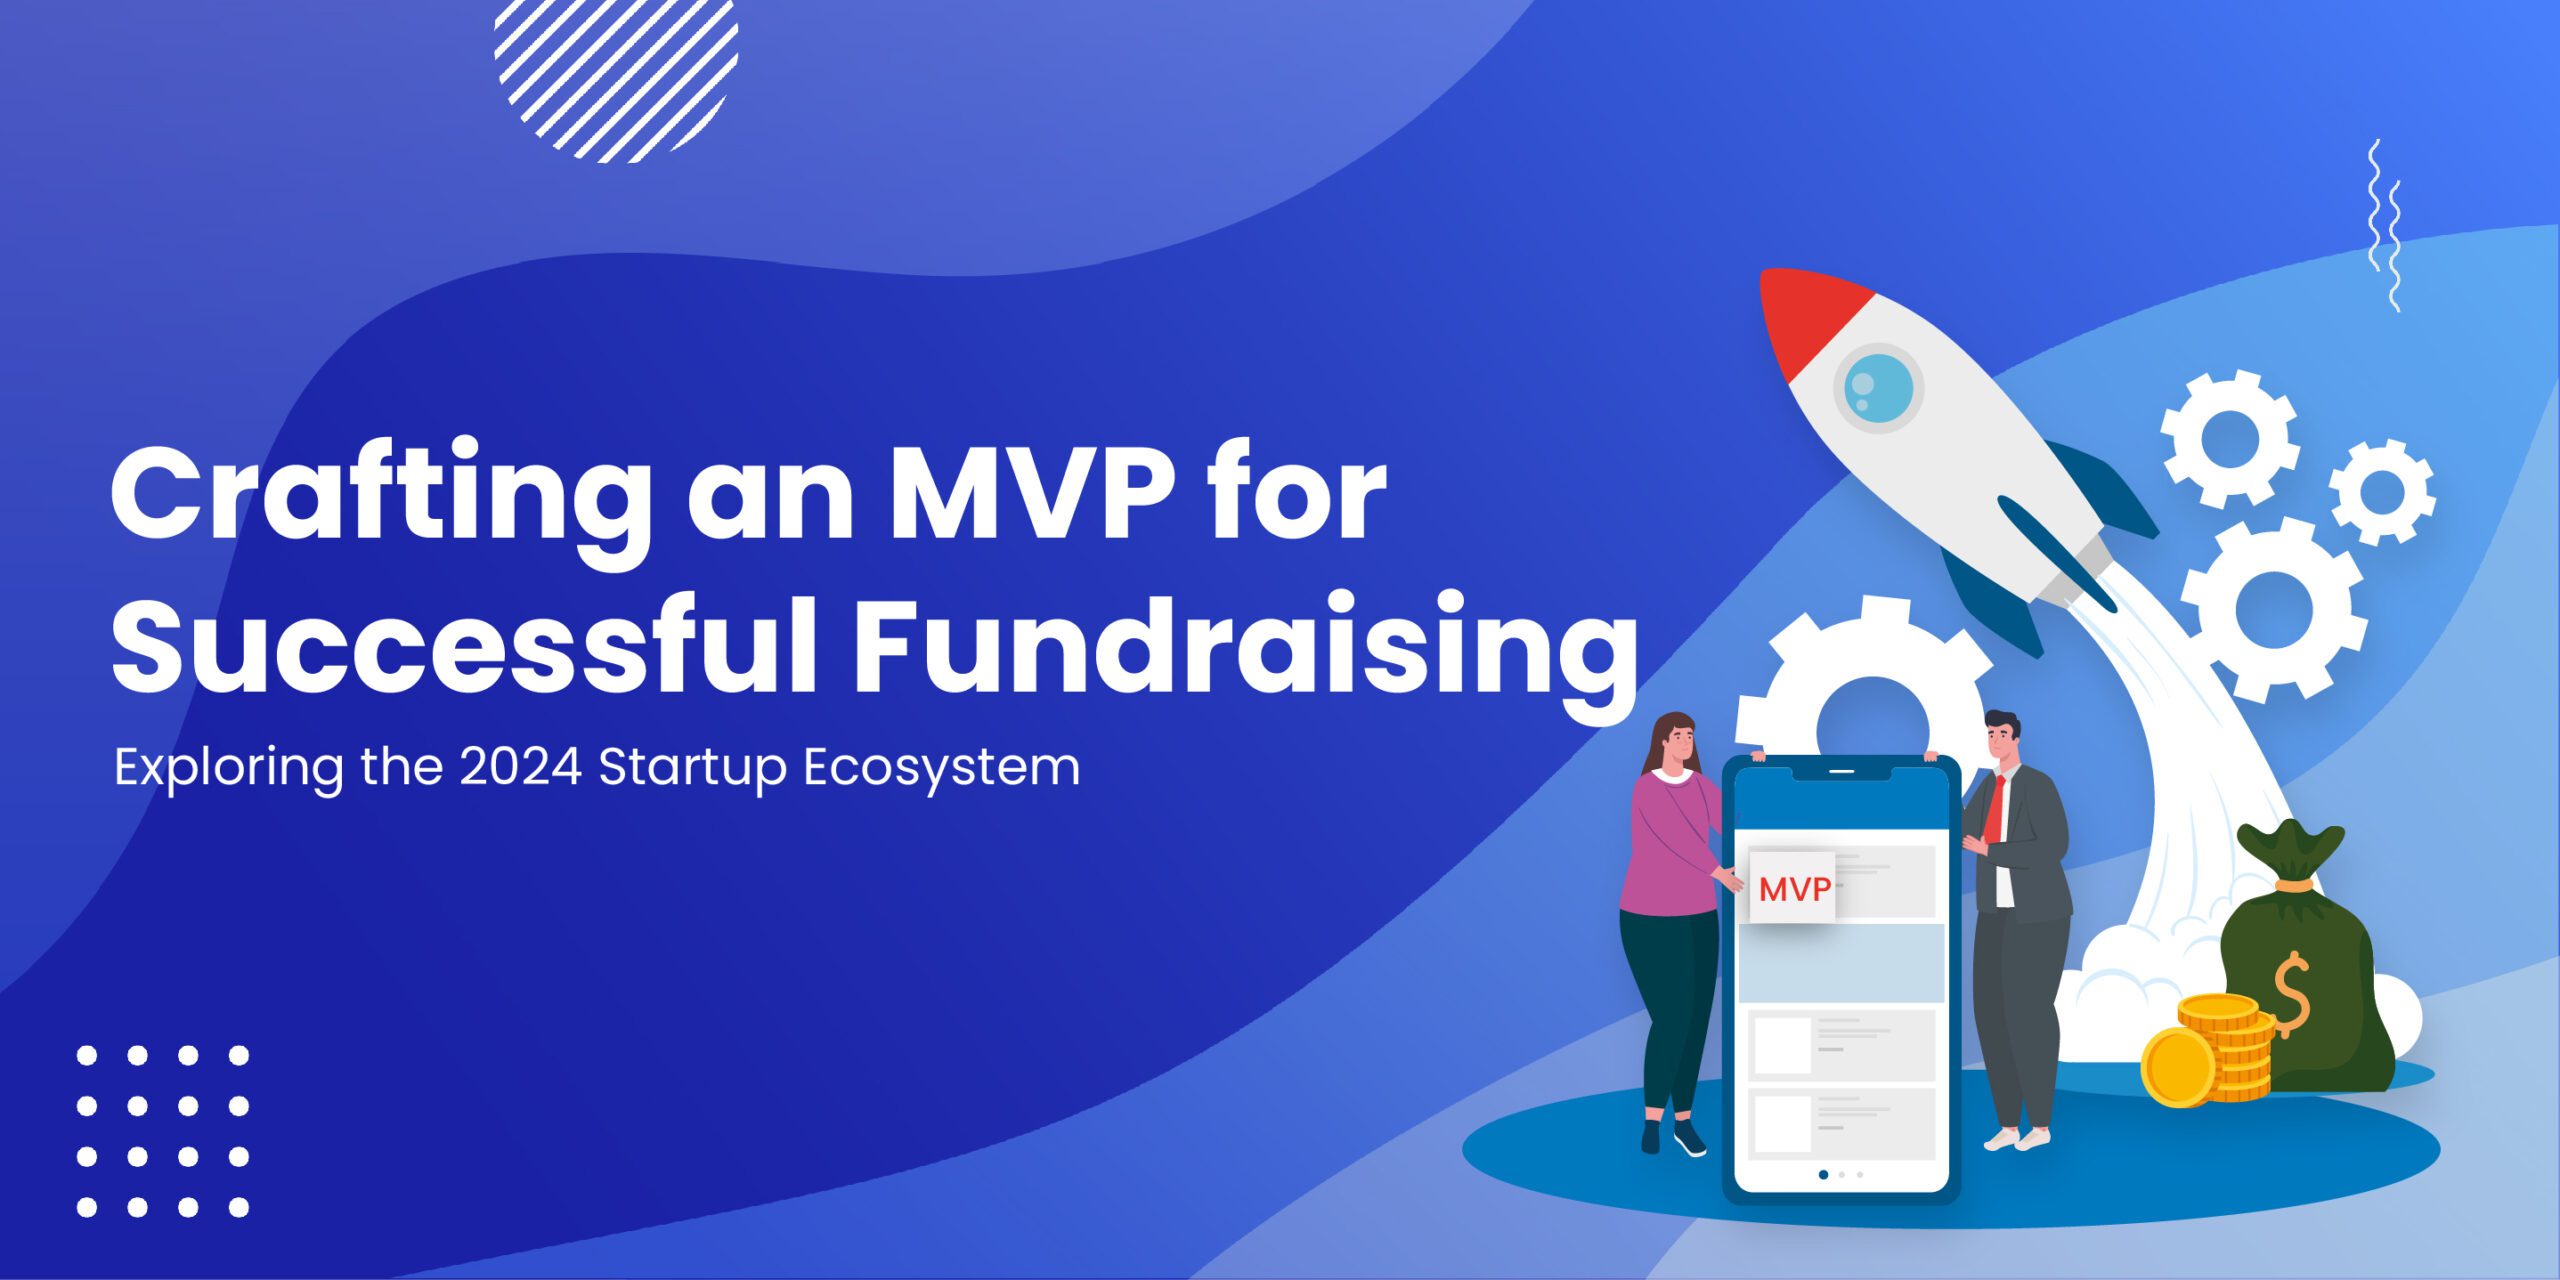 Exploring the 2024 Startup Ecosystem: Crafting an MVP for Successful Fundraising